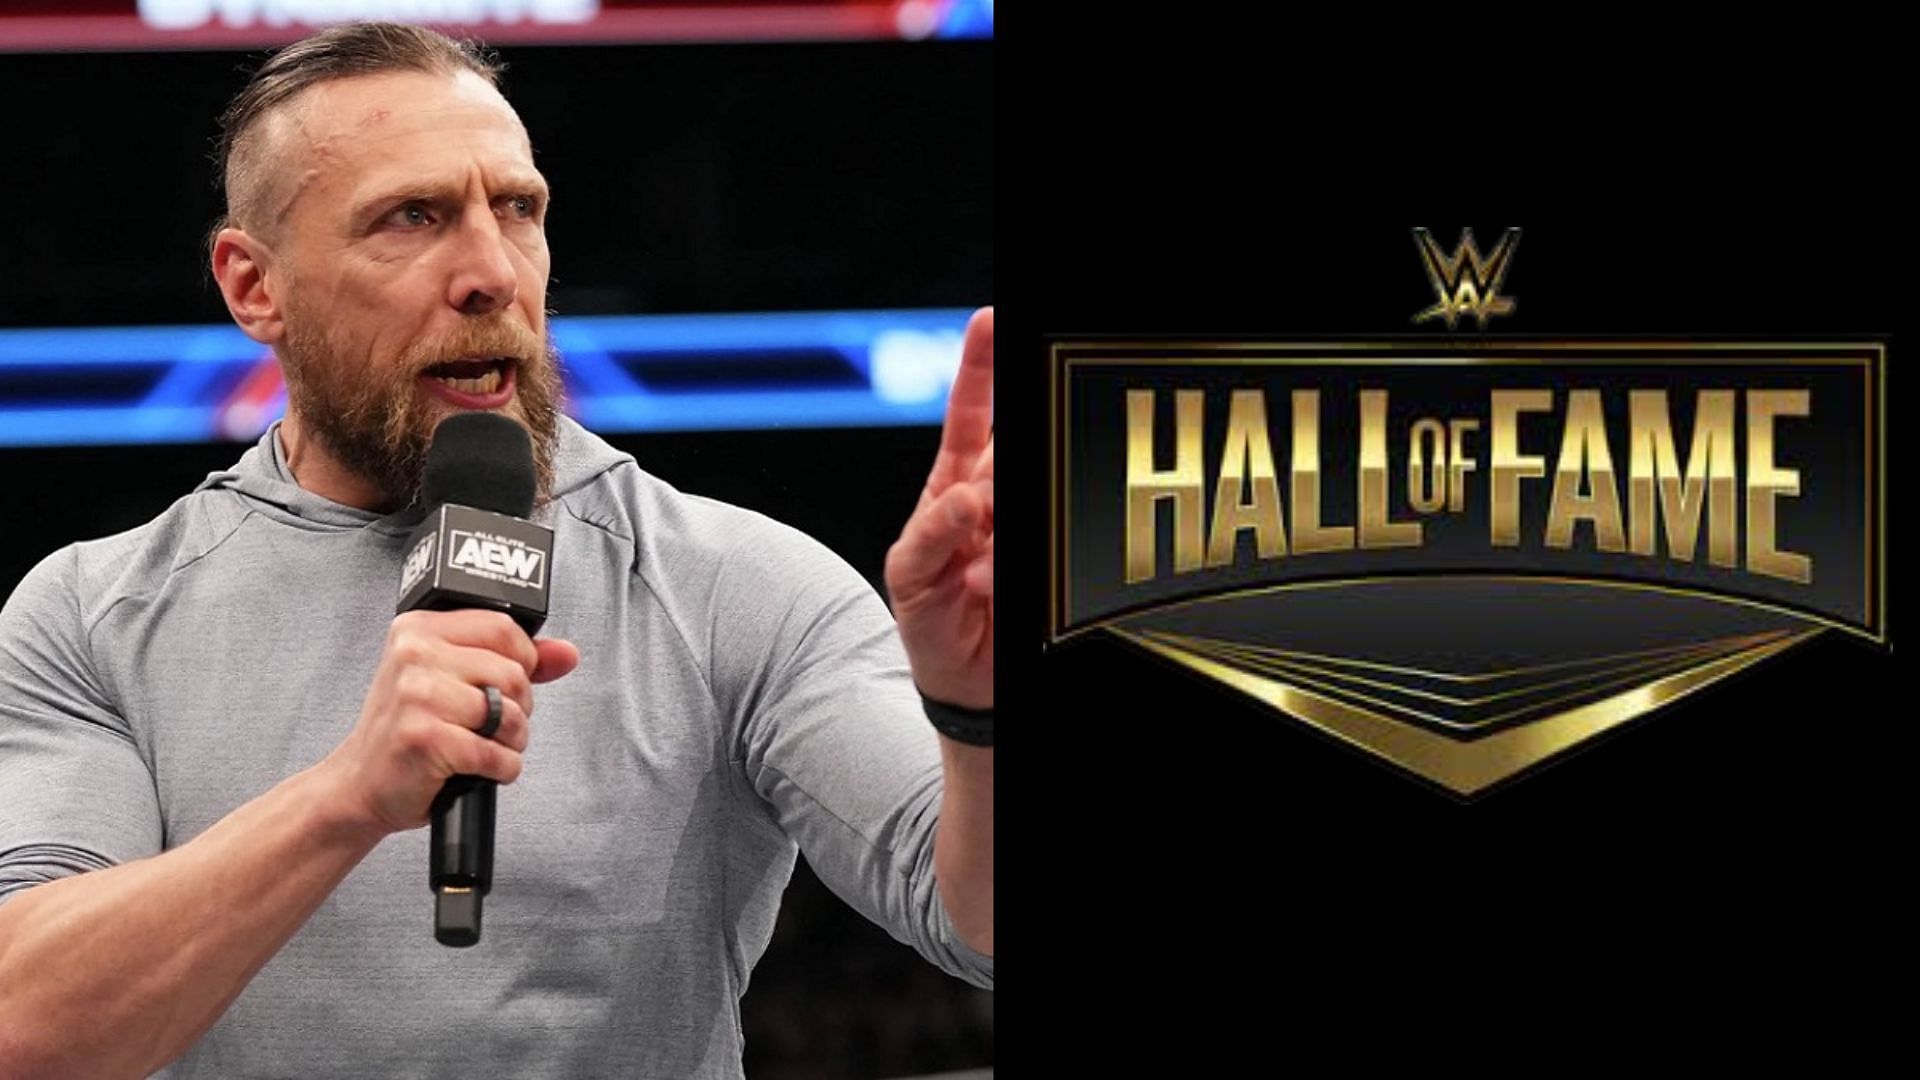 Bryan Danielson (left), WWE Hall of Fame logo (right)